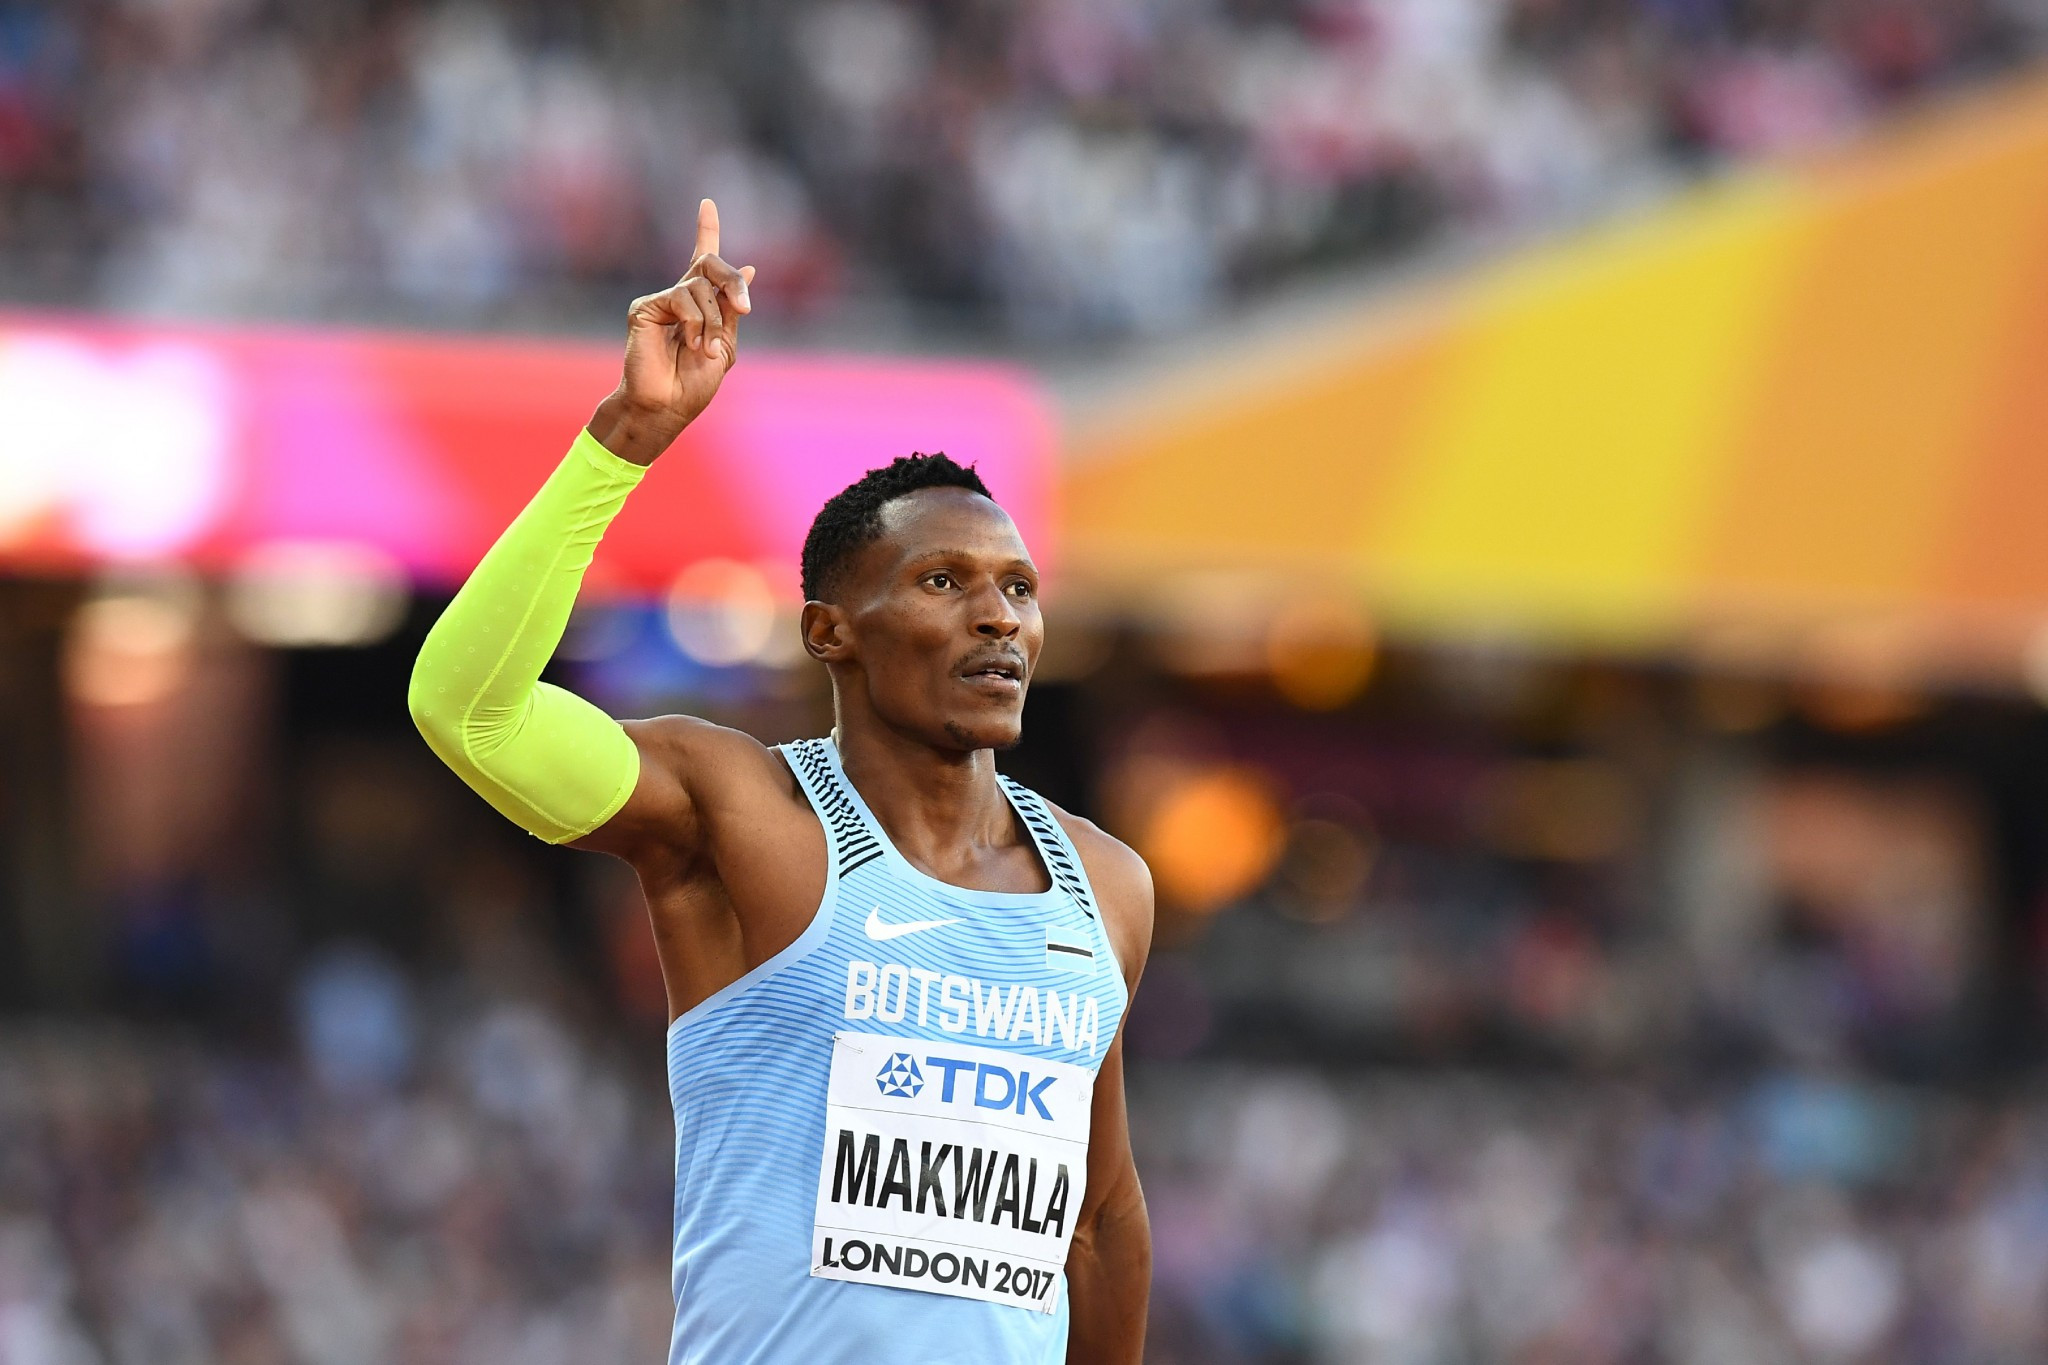 Botswana's Isaac Makwala has been cleared to compete in the 200 metres at the World Championships ©Getty Images